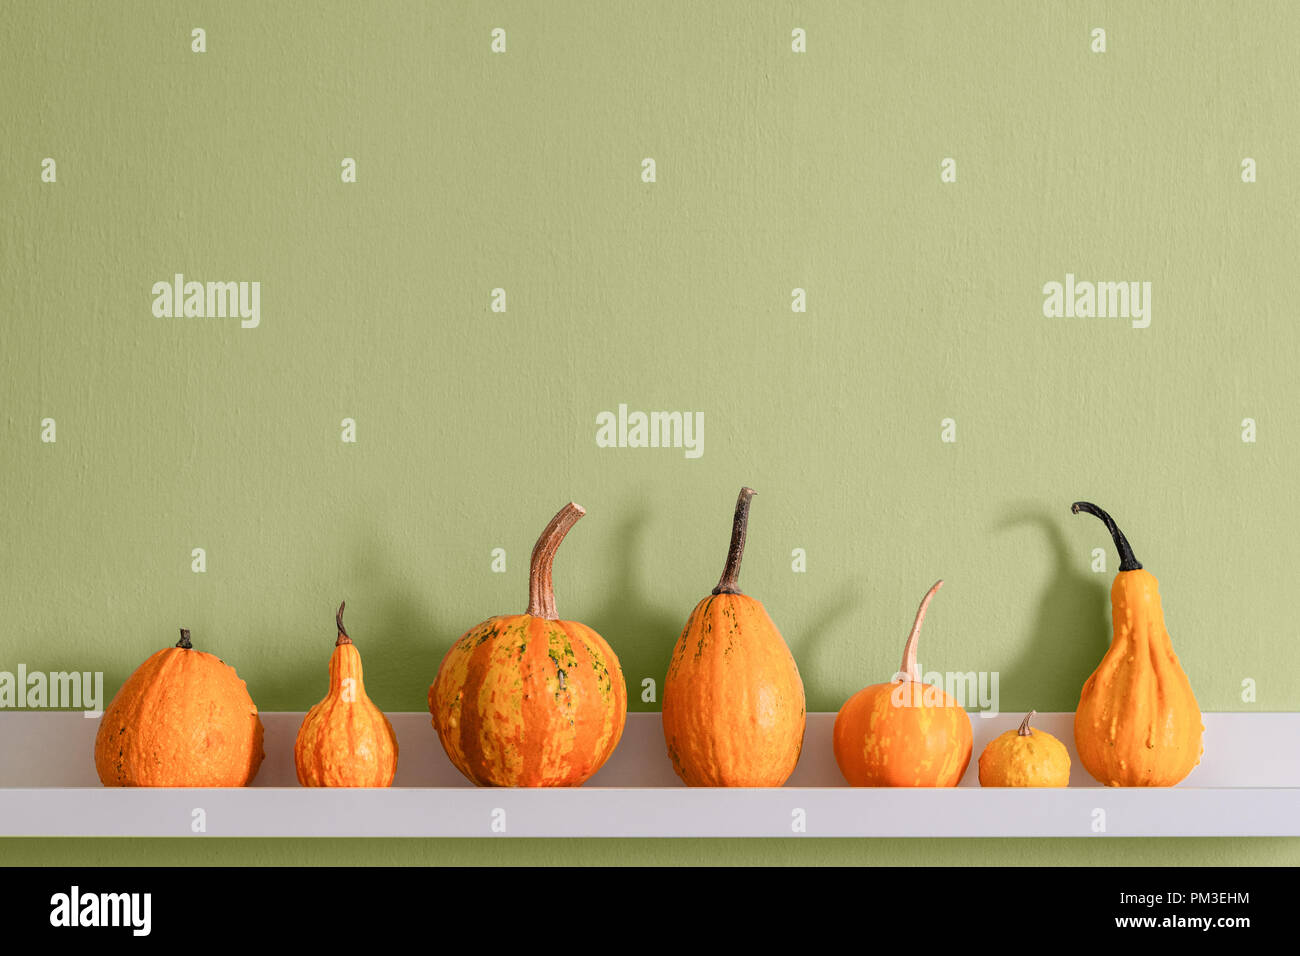 Happy Thanksgiving Background. Selection of various pumpkins on white shelf against green colored wall. Seasonal pumpkins room decoration. Modern mini Stock Photo